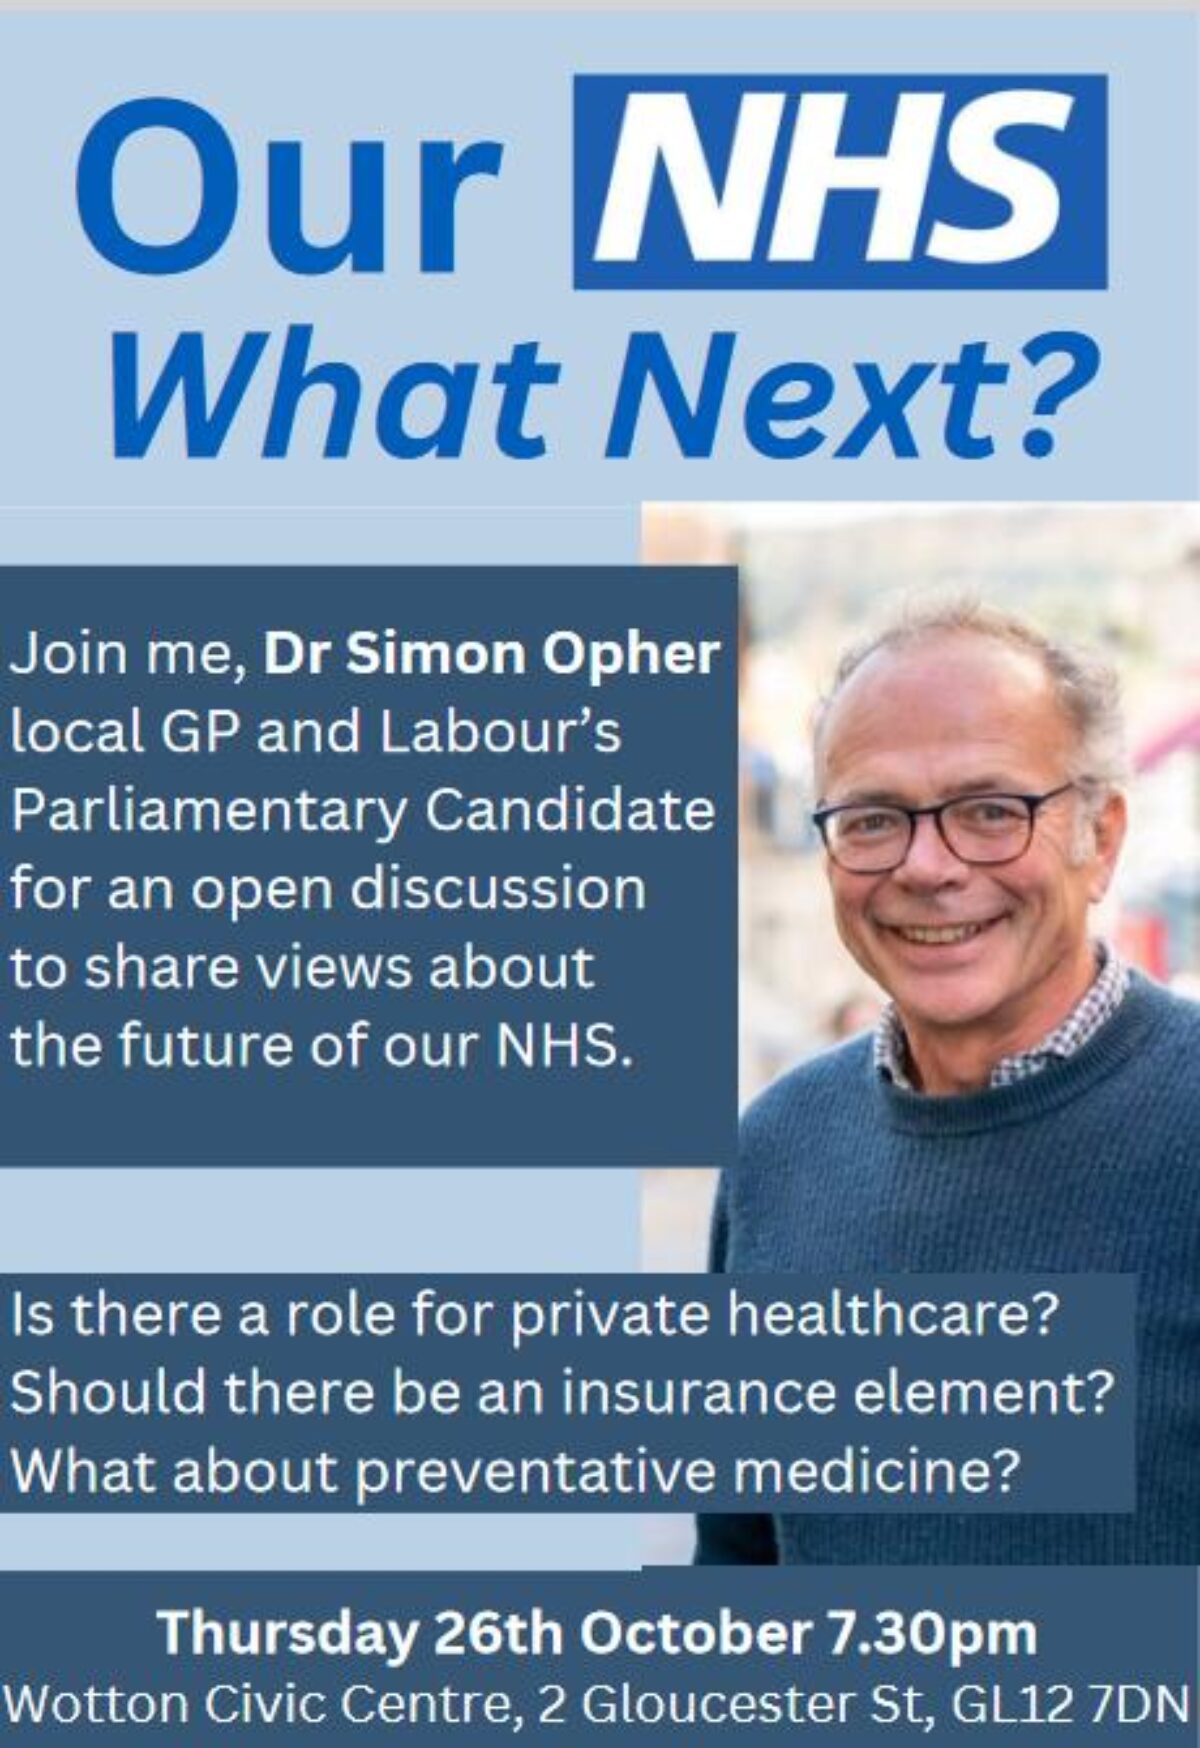 Our NHS - What Next